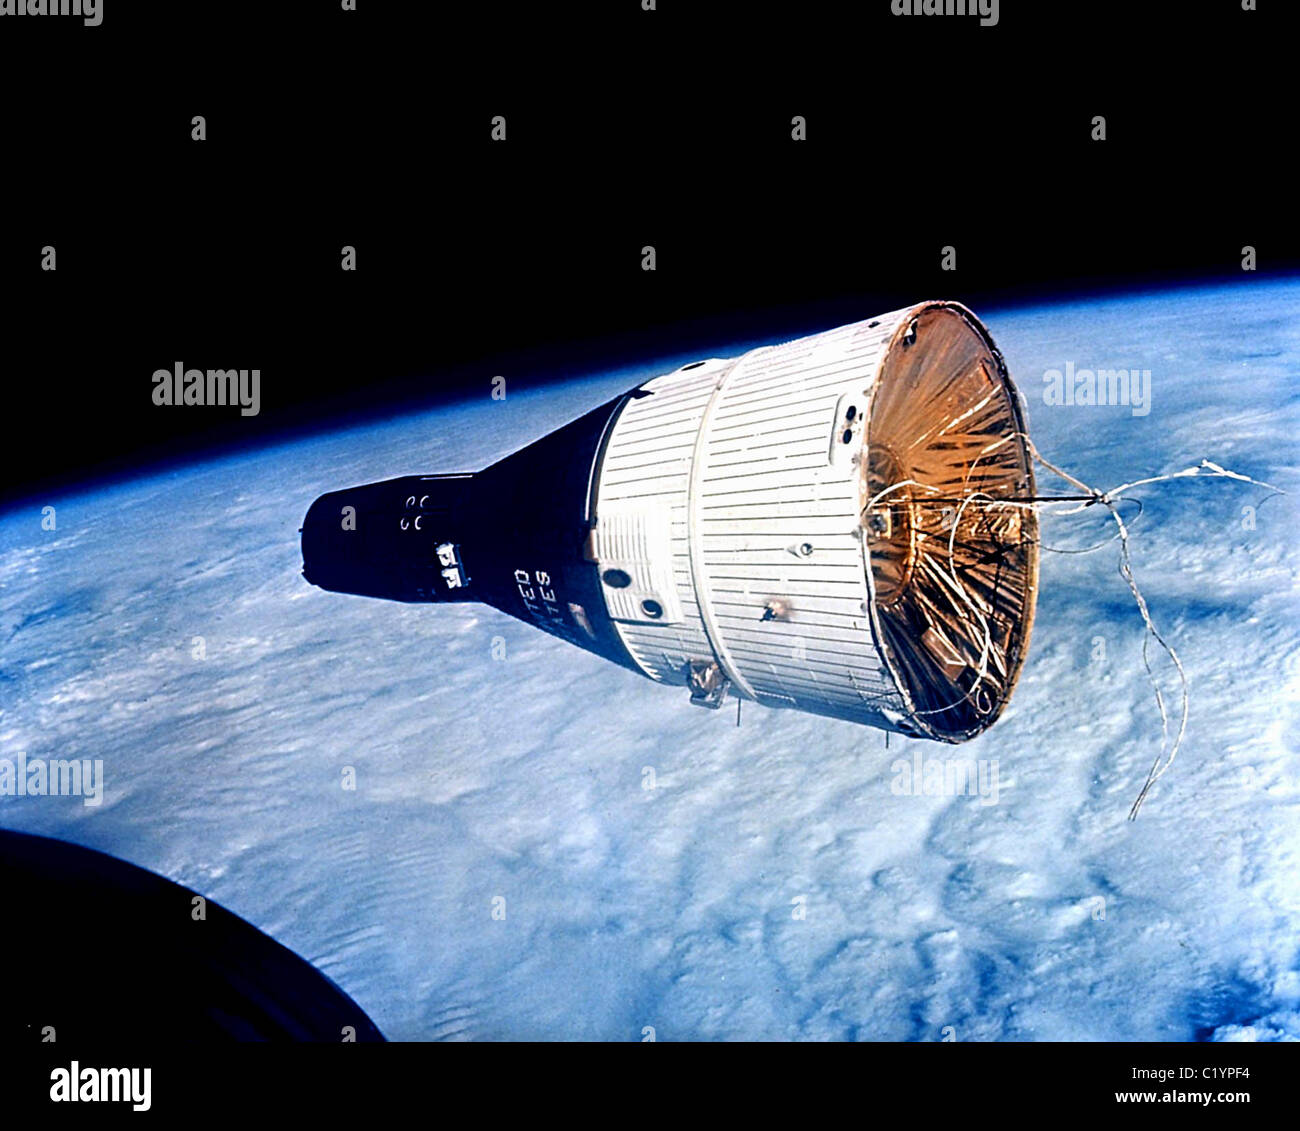 Gemini 7 as seen from Gemini 6 during their rendezvous in space (NASA) Stock Photo